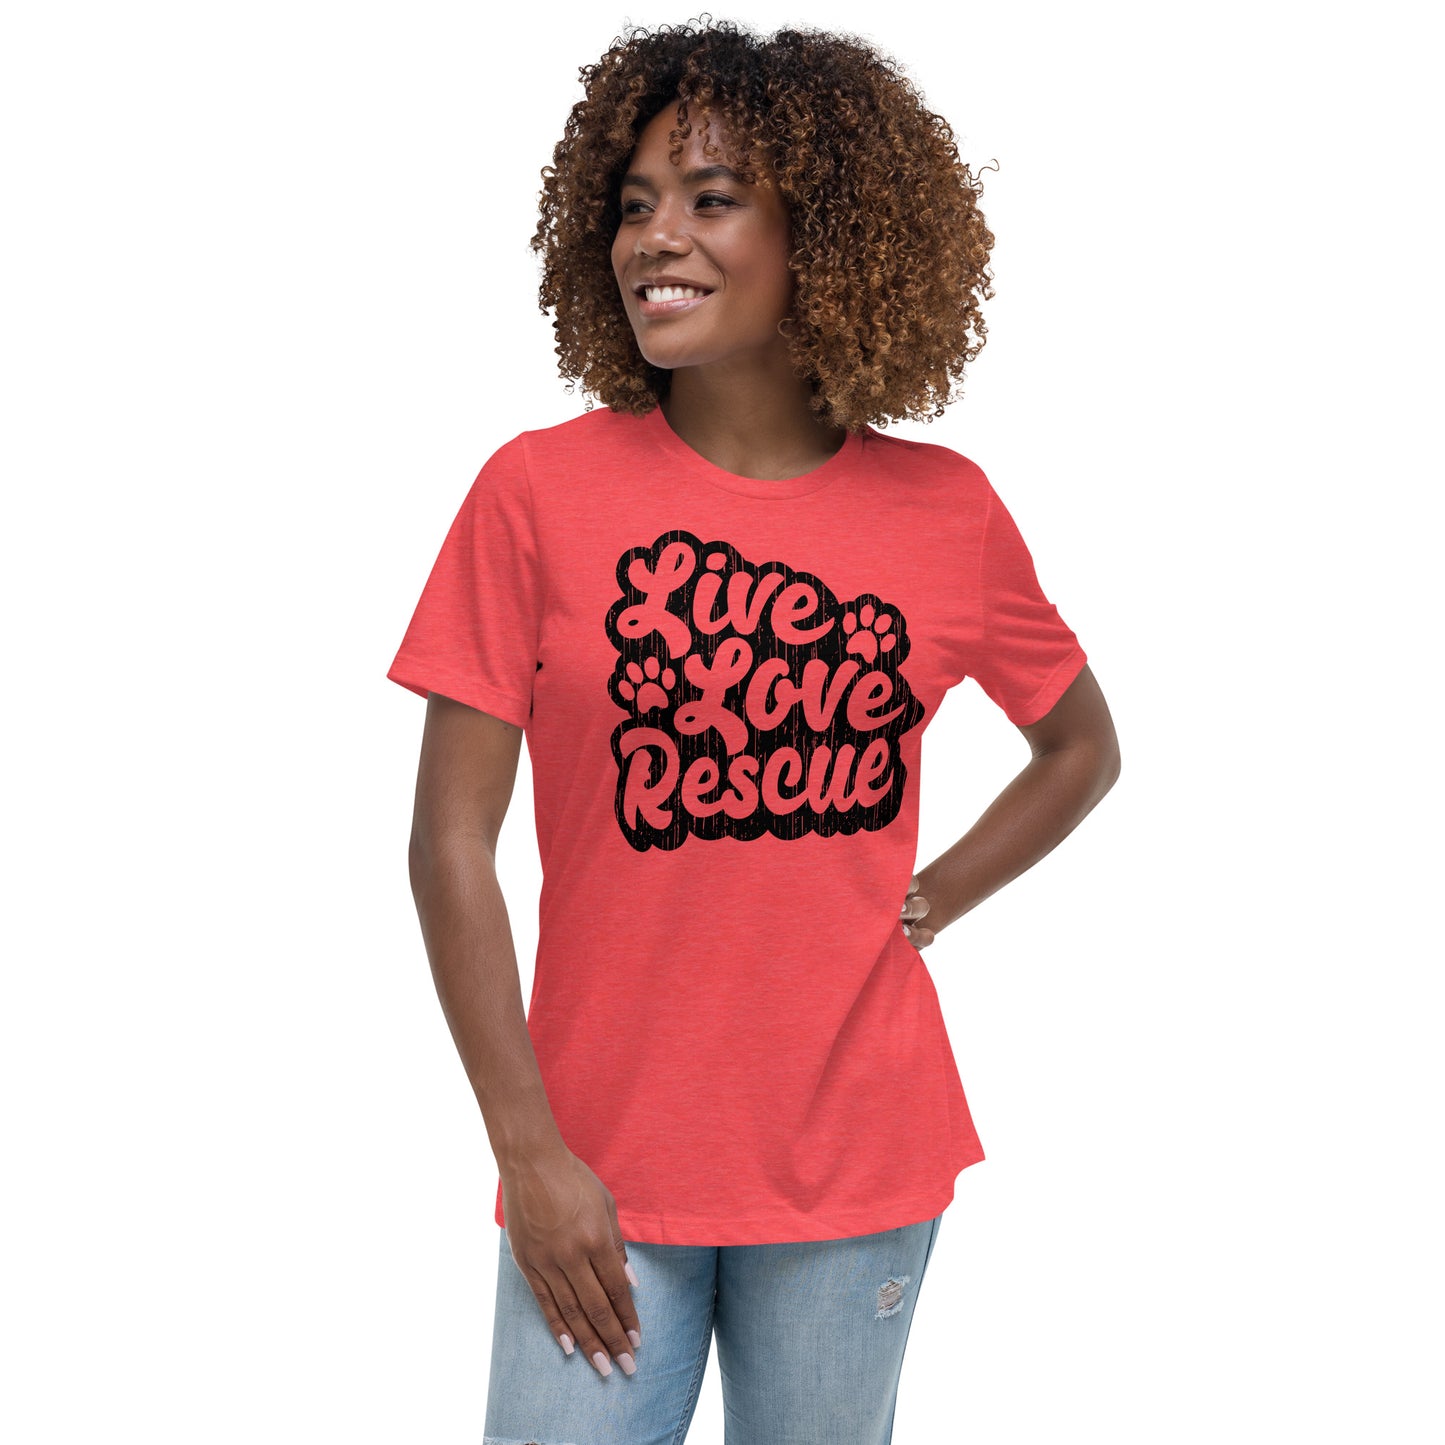 Live love rescue retro women’s relaxed fit t-shirts by Dog Artistry red color